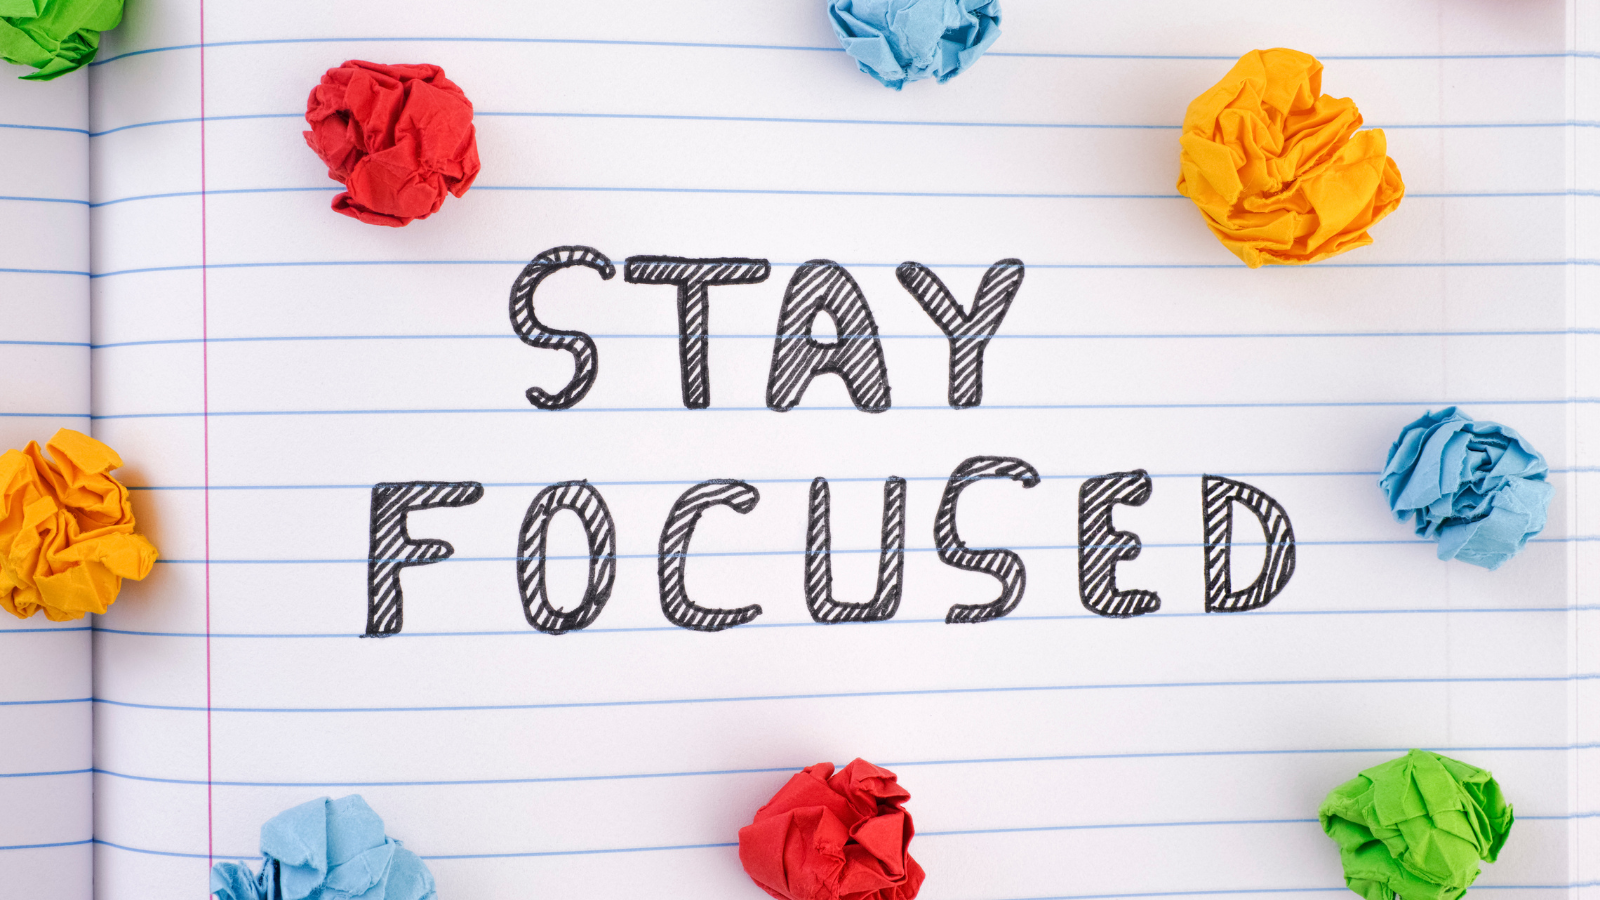 Words "Stay Focused" on creating A Business Plan